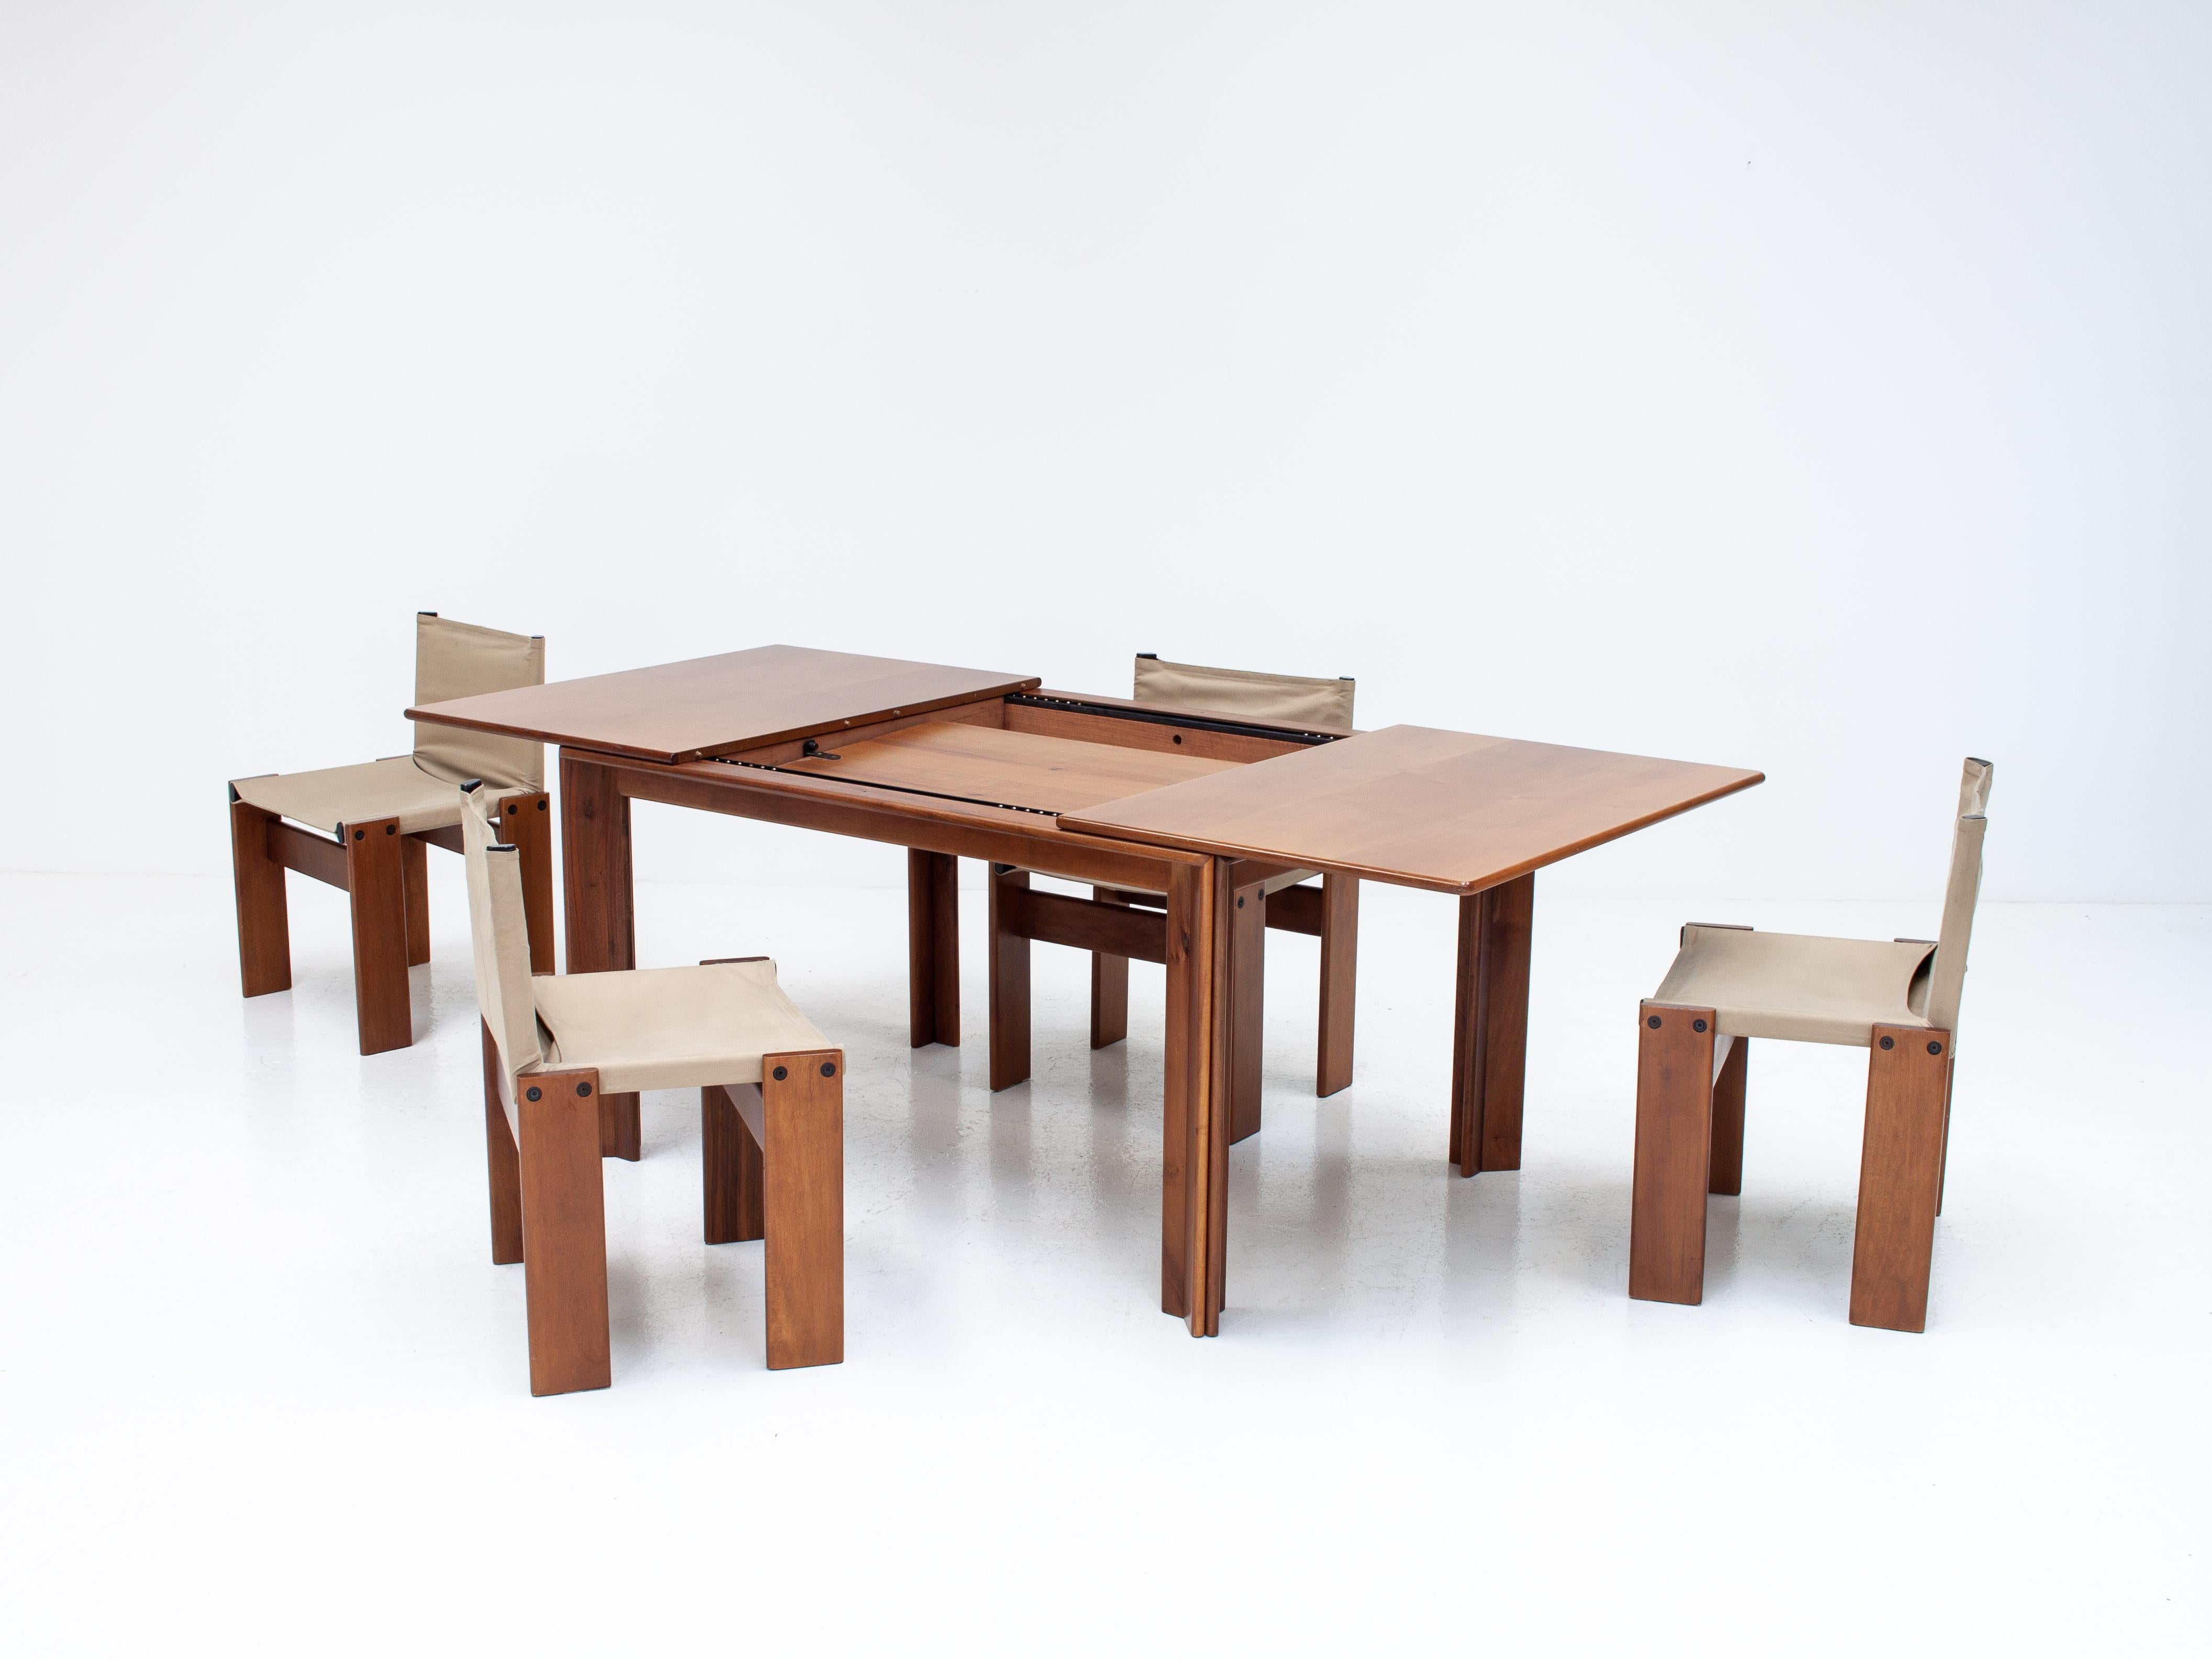 Canvas Afra & Tobia Scarpa 'Monk' Dining Chairs & Table for Molteni, Italy, 1974